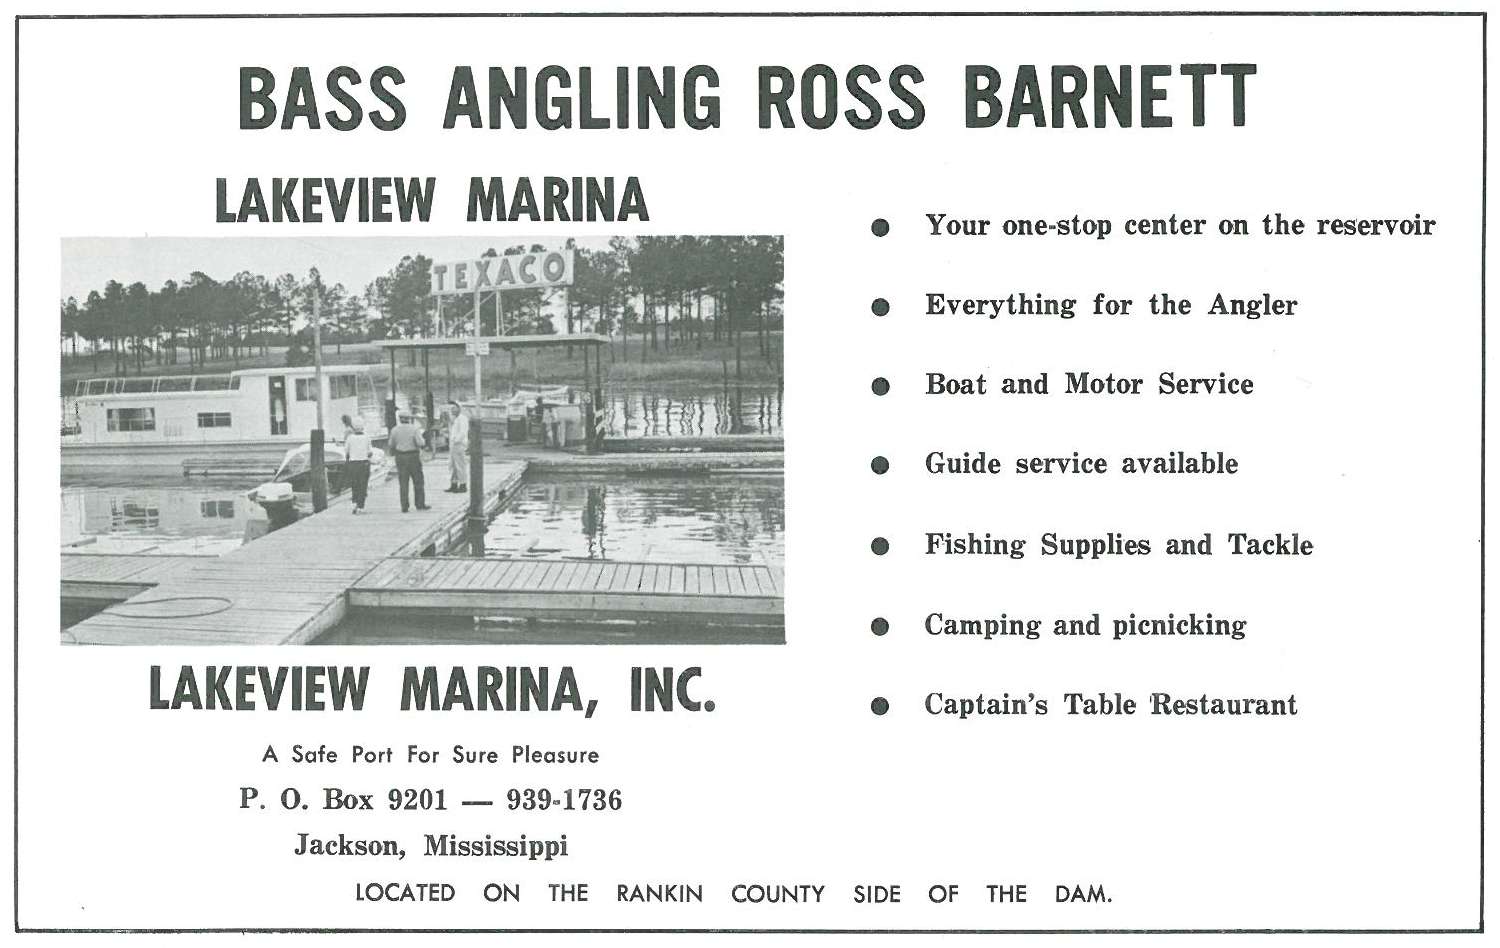 The Lakeview Marina is located on the popular Ross Barnett Reservoir in Mississippi. In the early days, marina ads in the magazine were sometimes traded out for hosting B.A.S.S. tournaments.